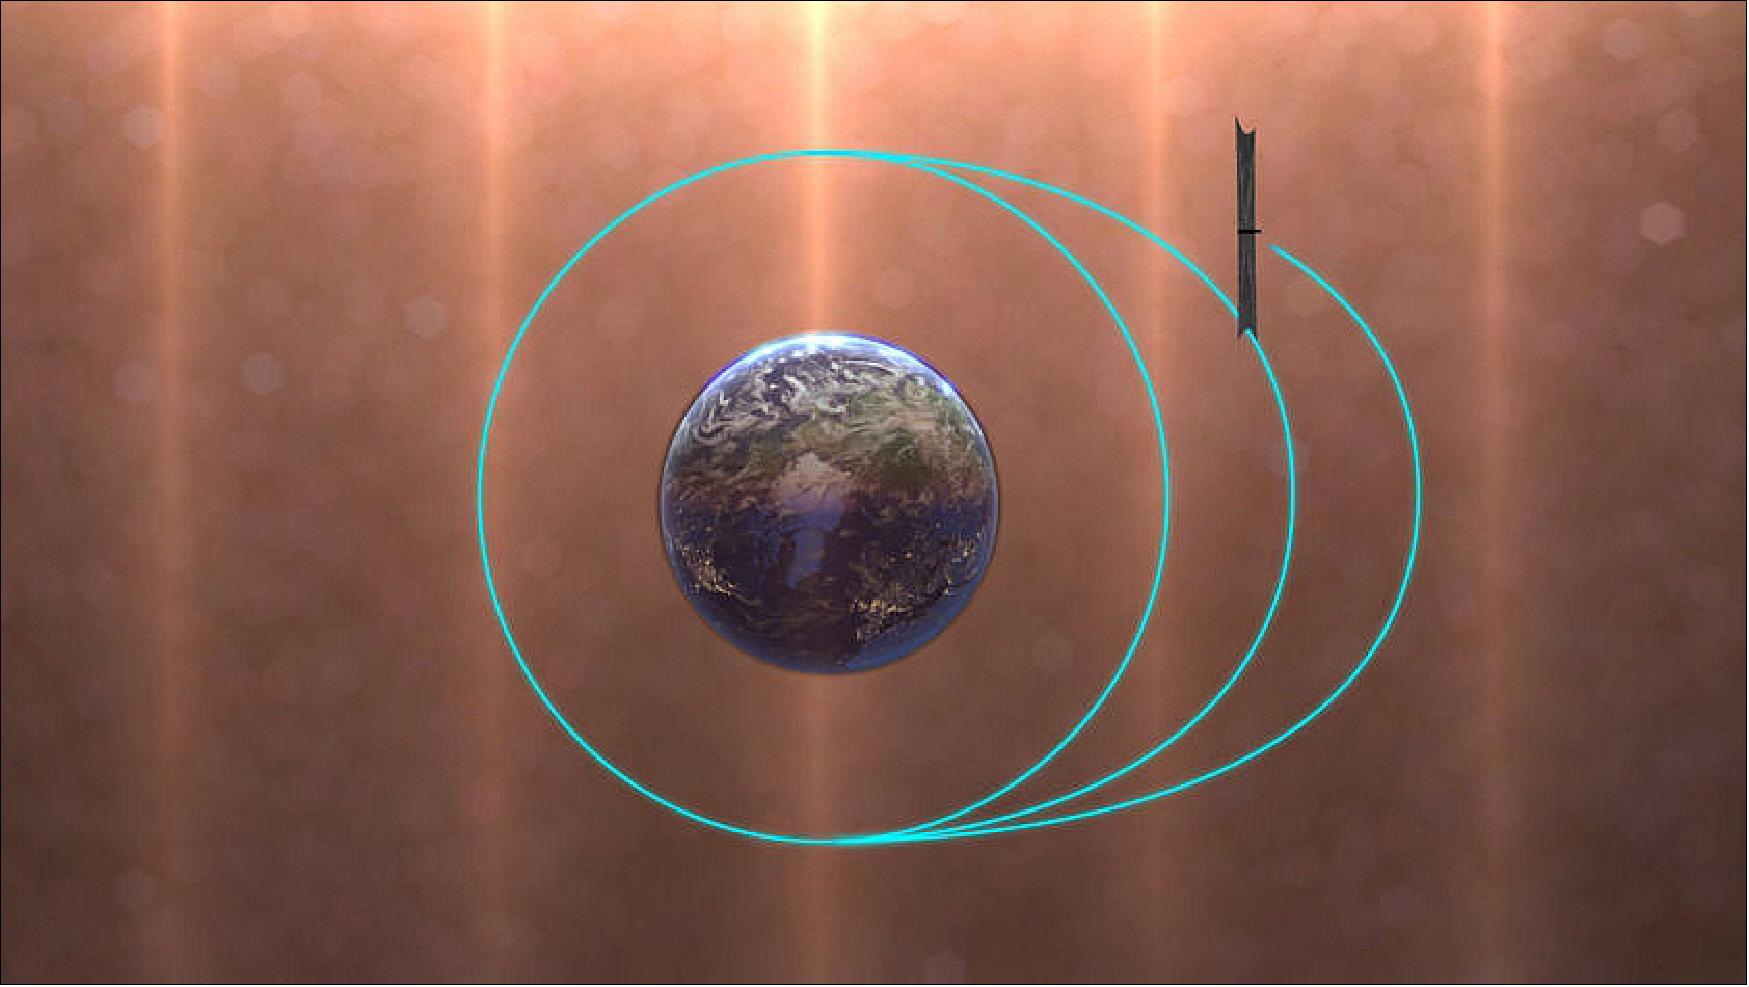 Figure 4: LightSail-2 orbital raising. LightSail-2 makes 90-degree turns to gradually raise the semi-major axis of its orbit by several hundred meters per day (image credit: Josh Spradling / The Planetary Society)